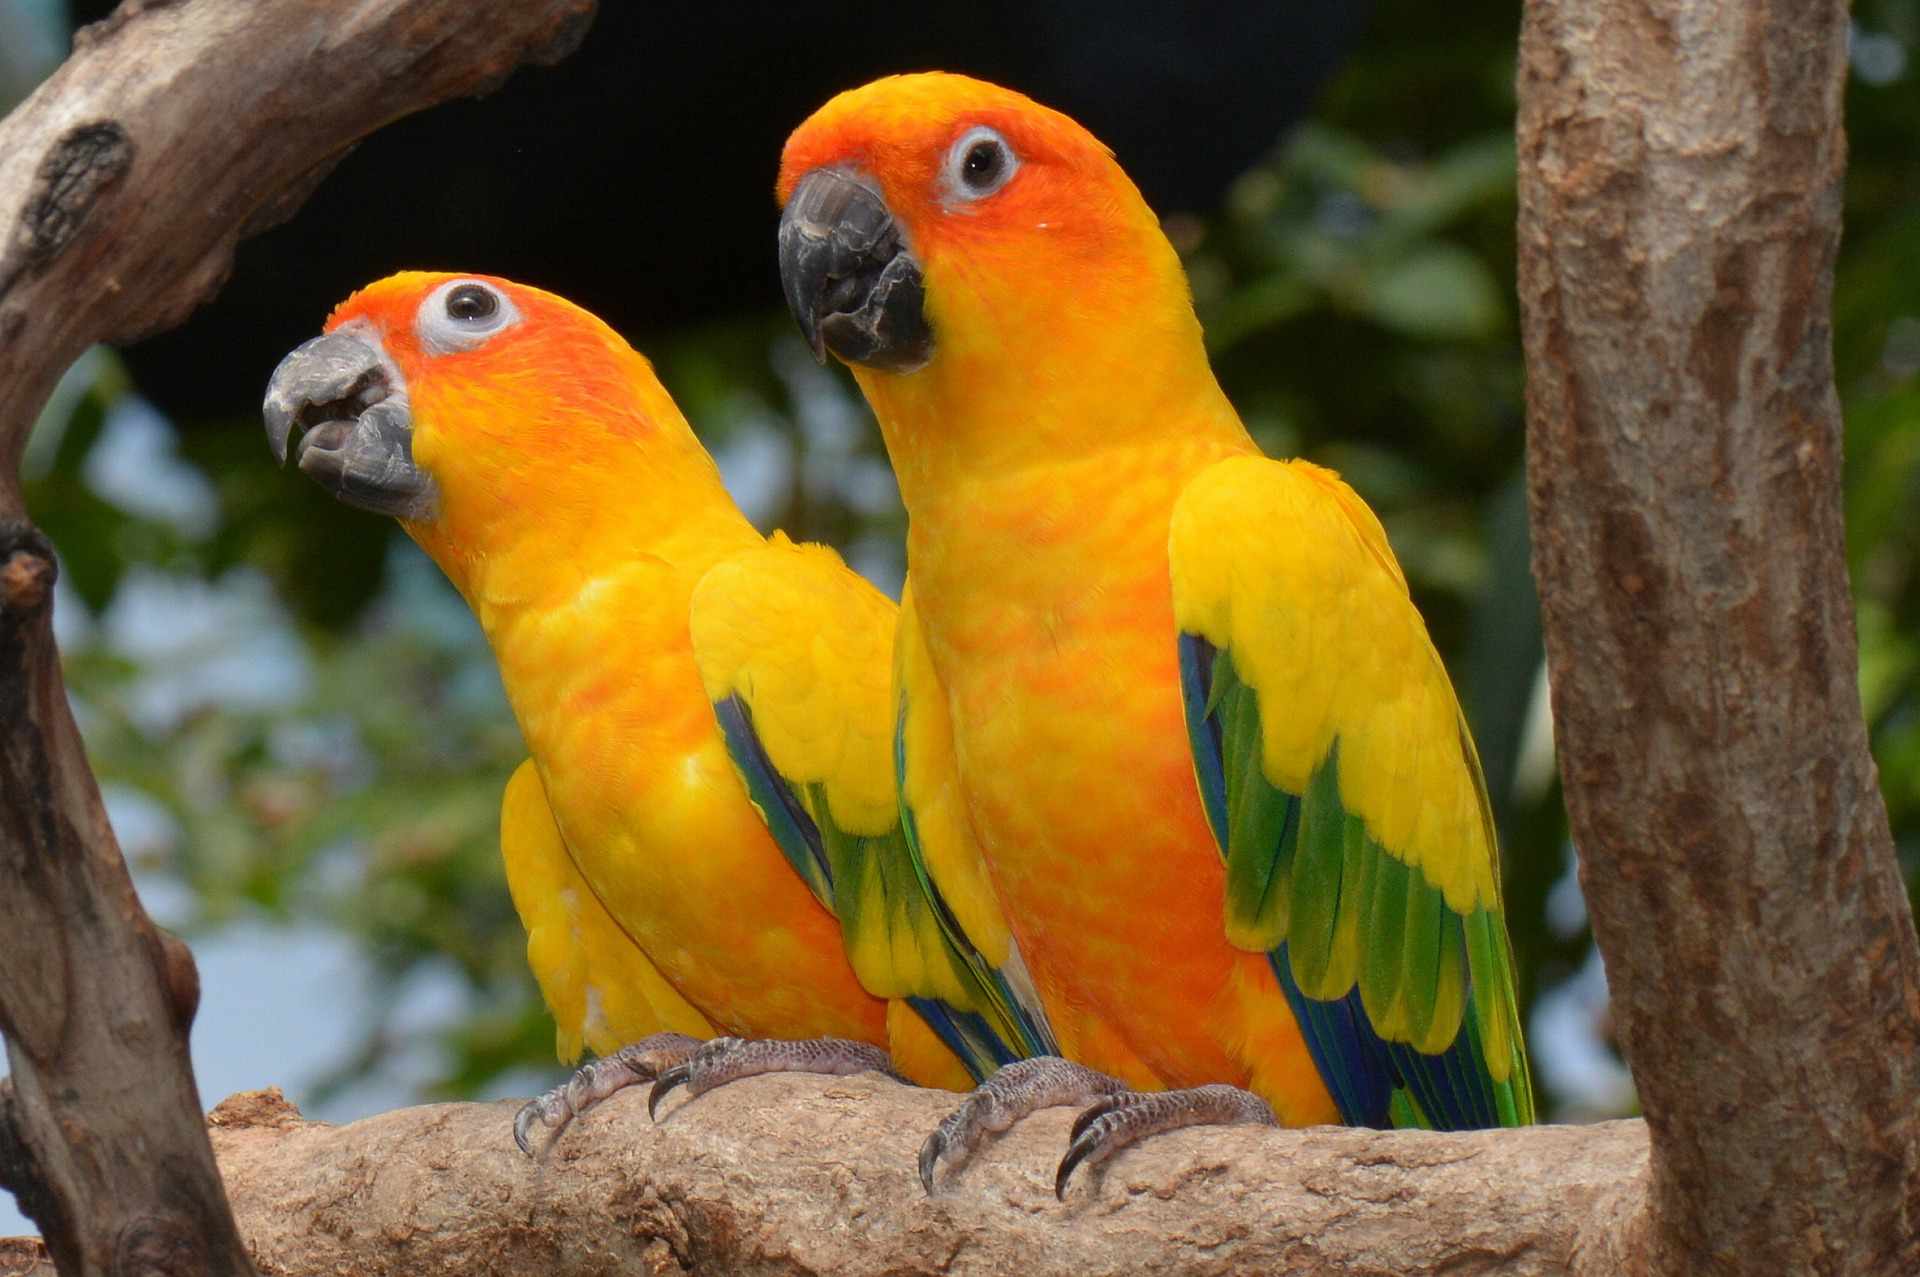 Two sun conures perched in a tree